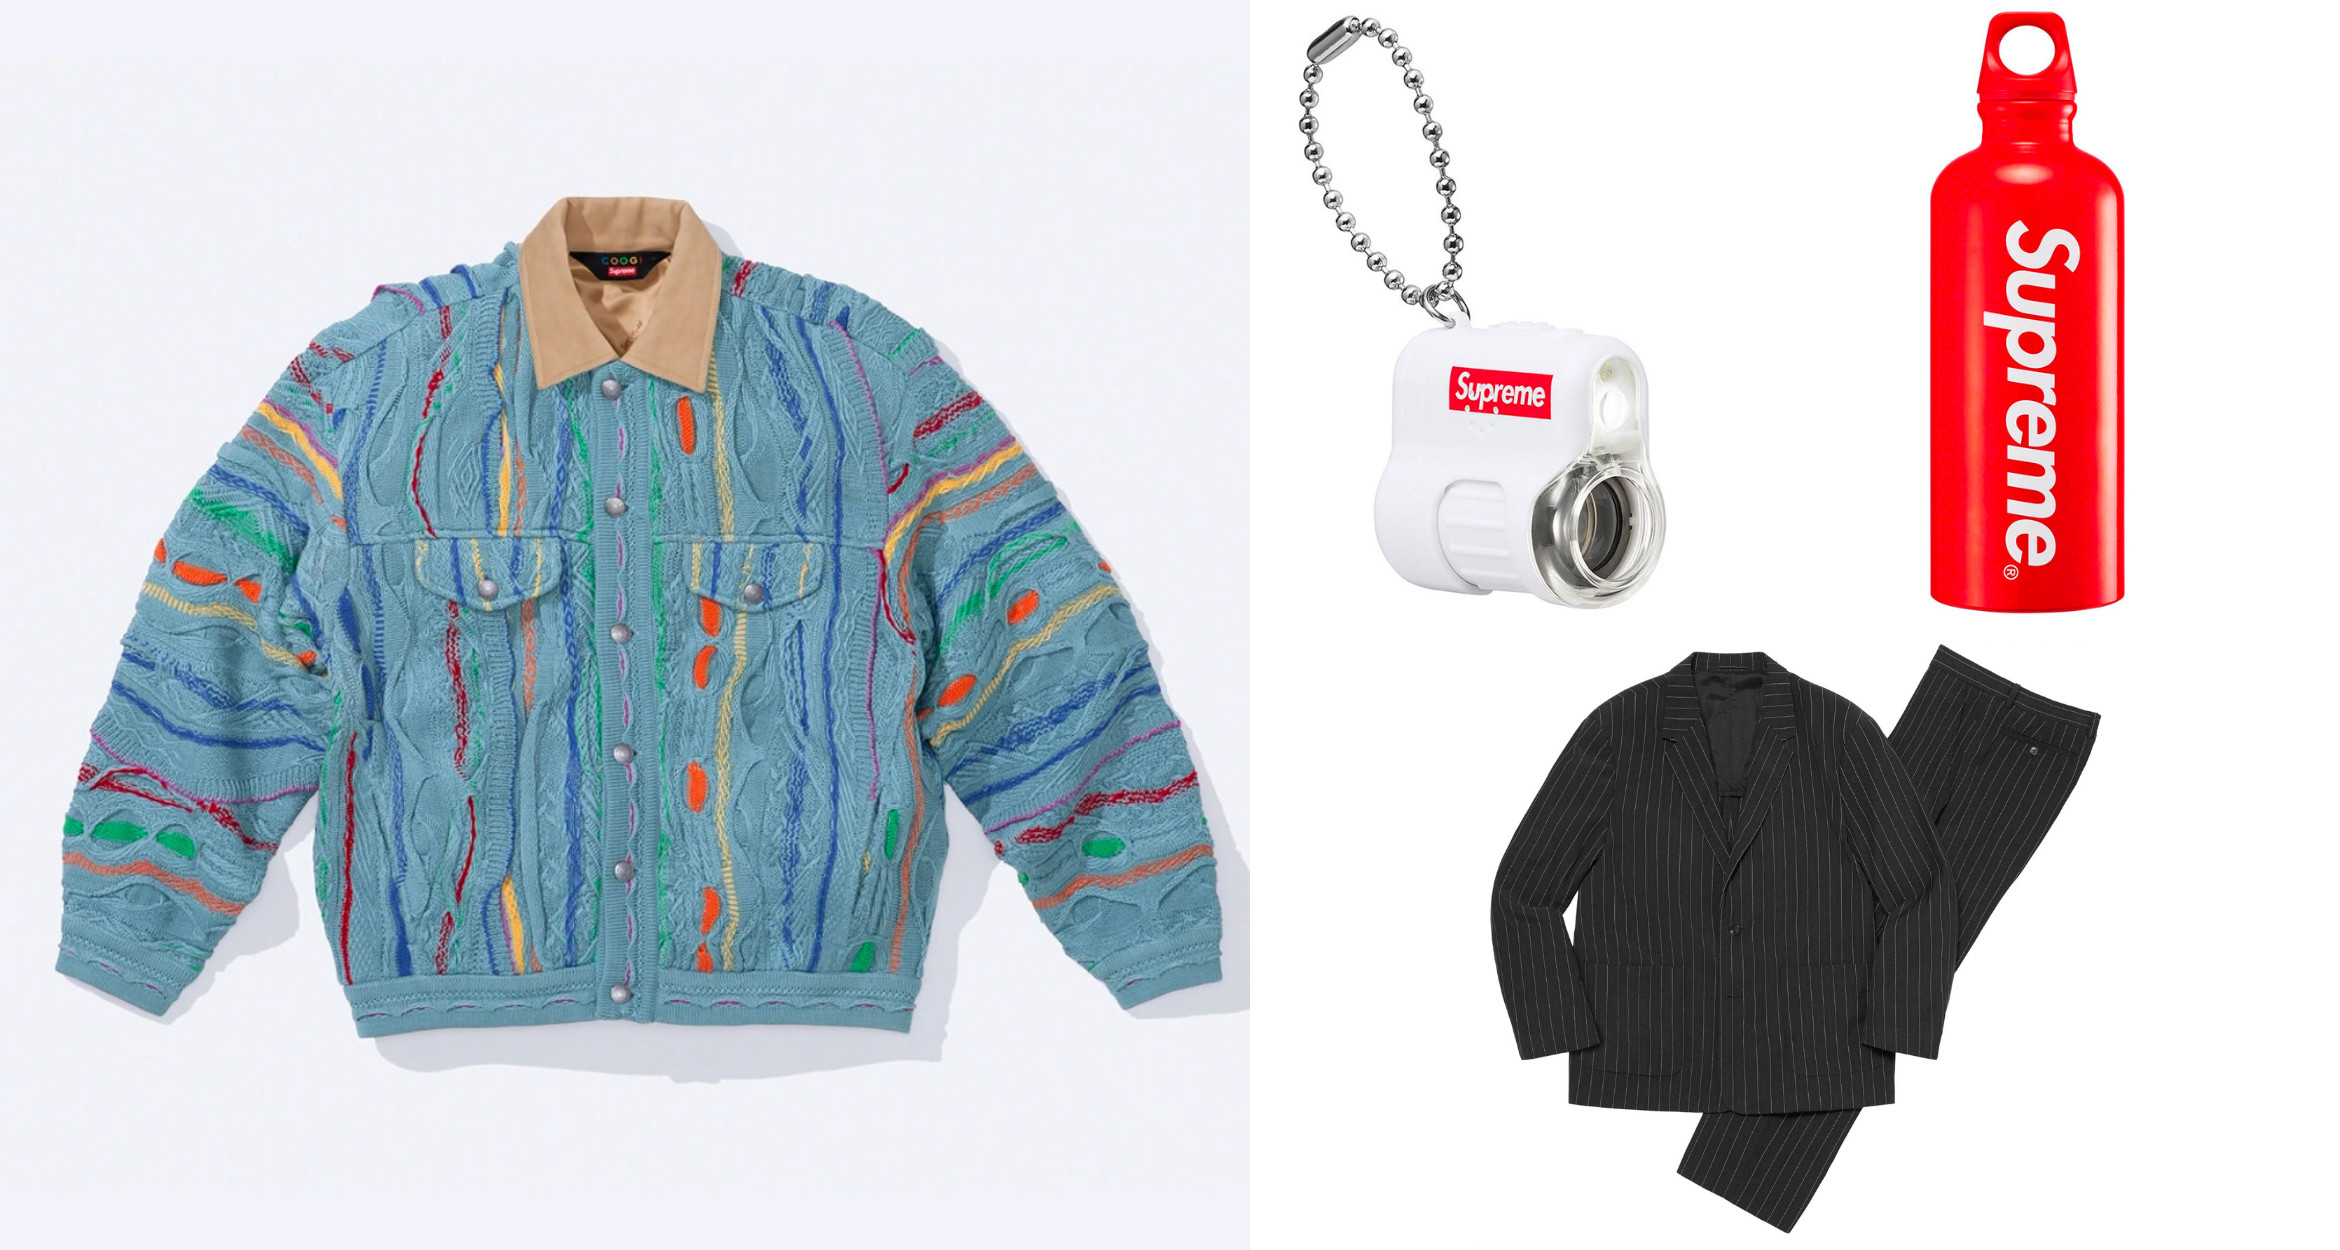 Supreme Drop Pseudo Coogi Clothing, Microscopes and Suits in Week 11  Release - SLN Official